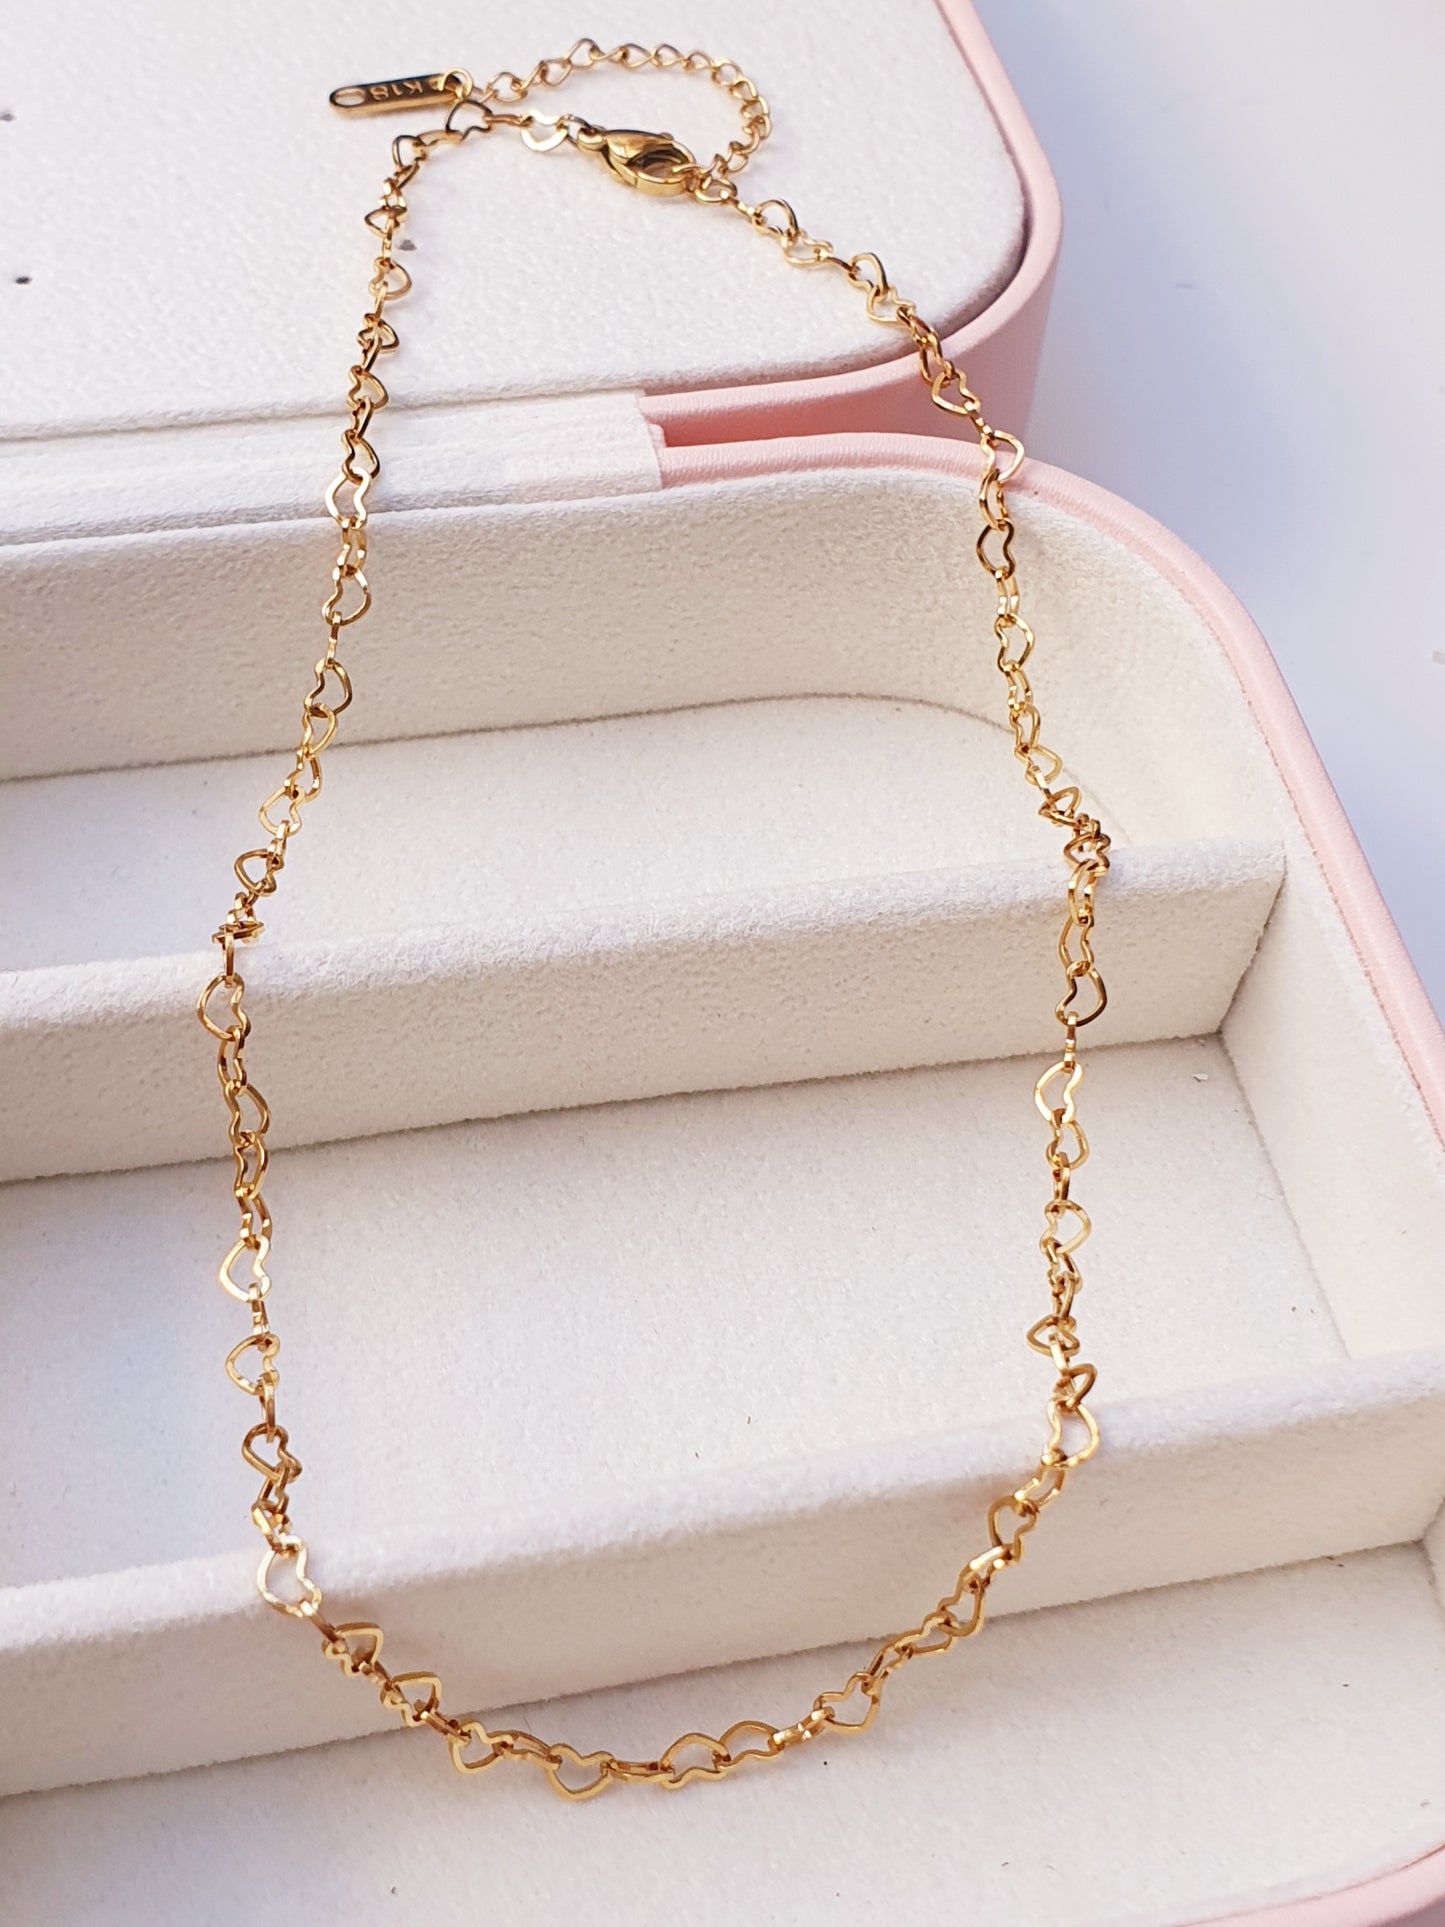 Gold choker made up of heart shaped chain links resting on a jewellery box